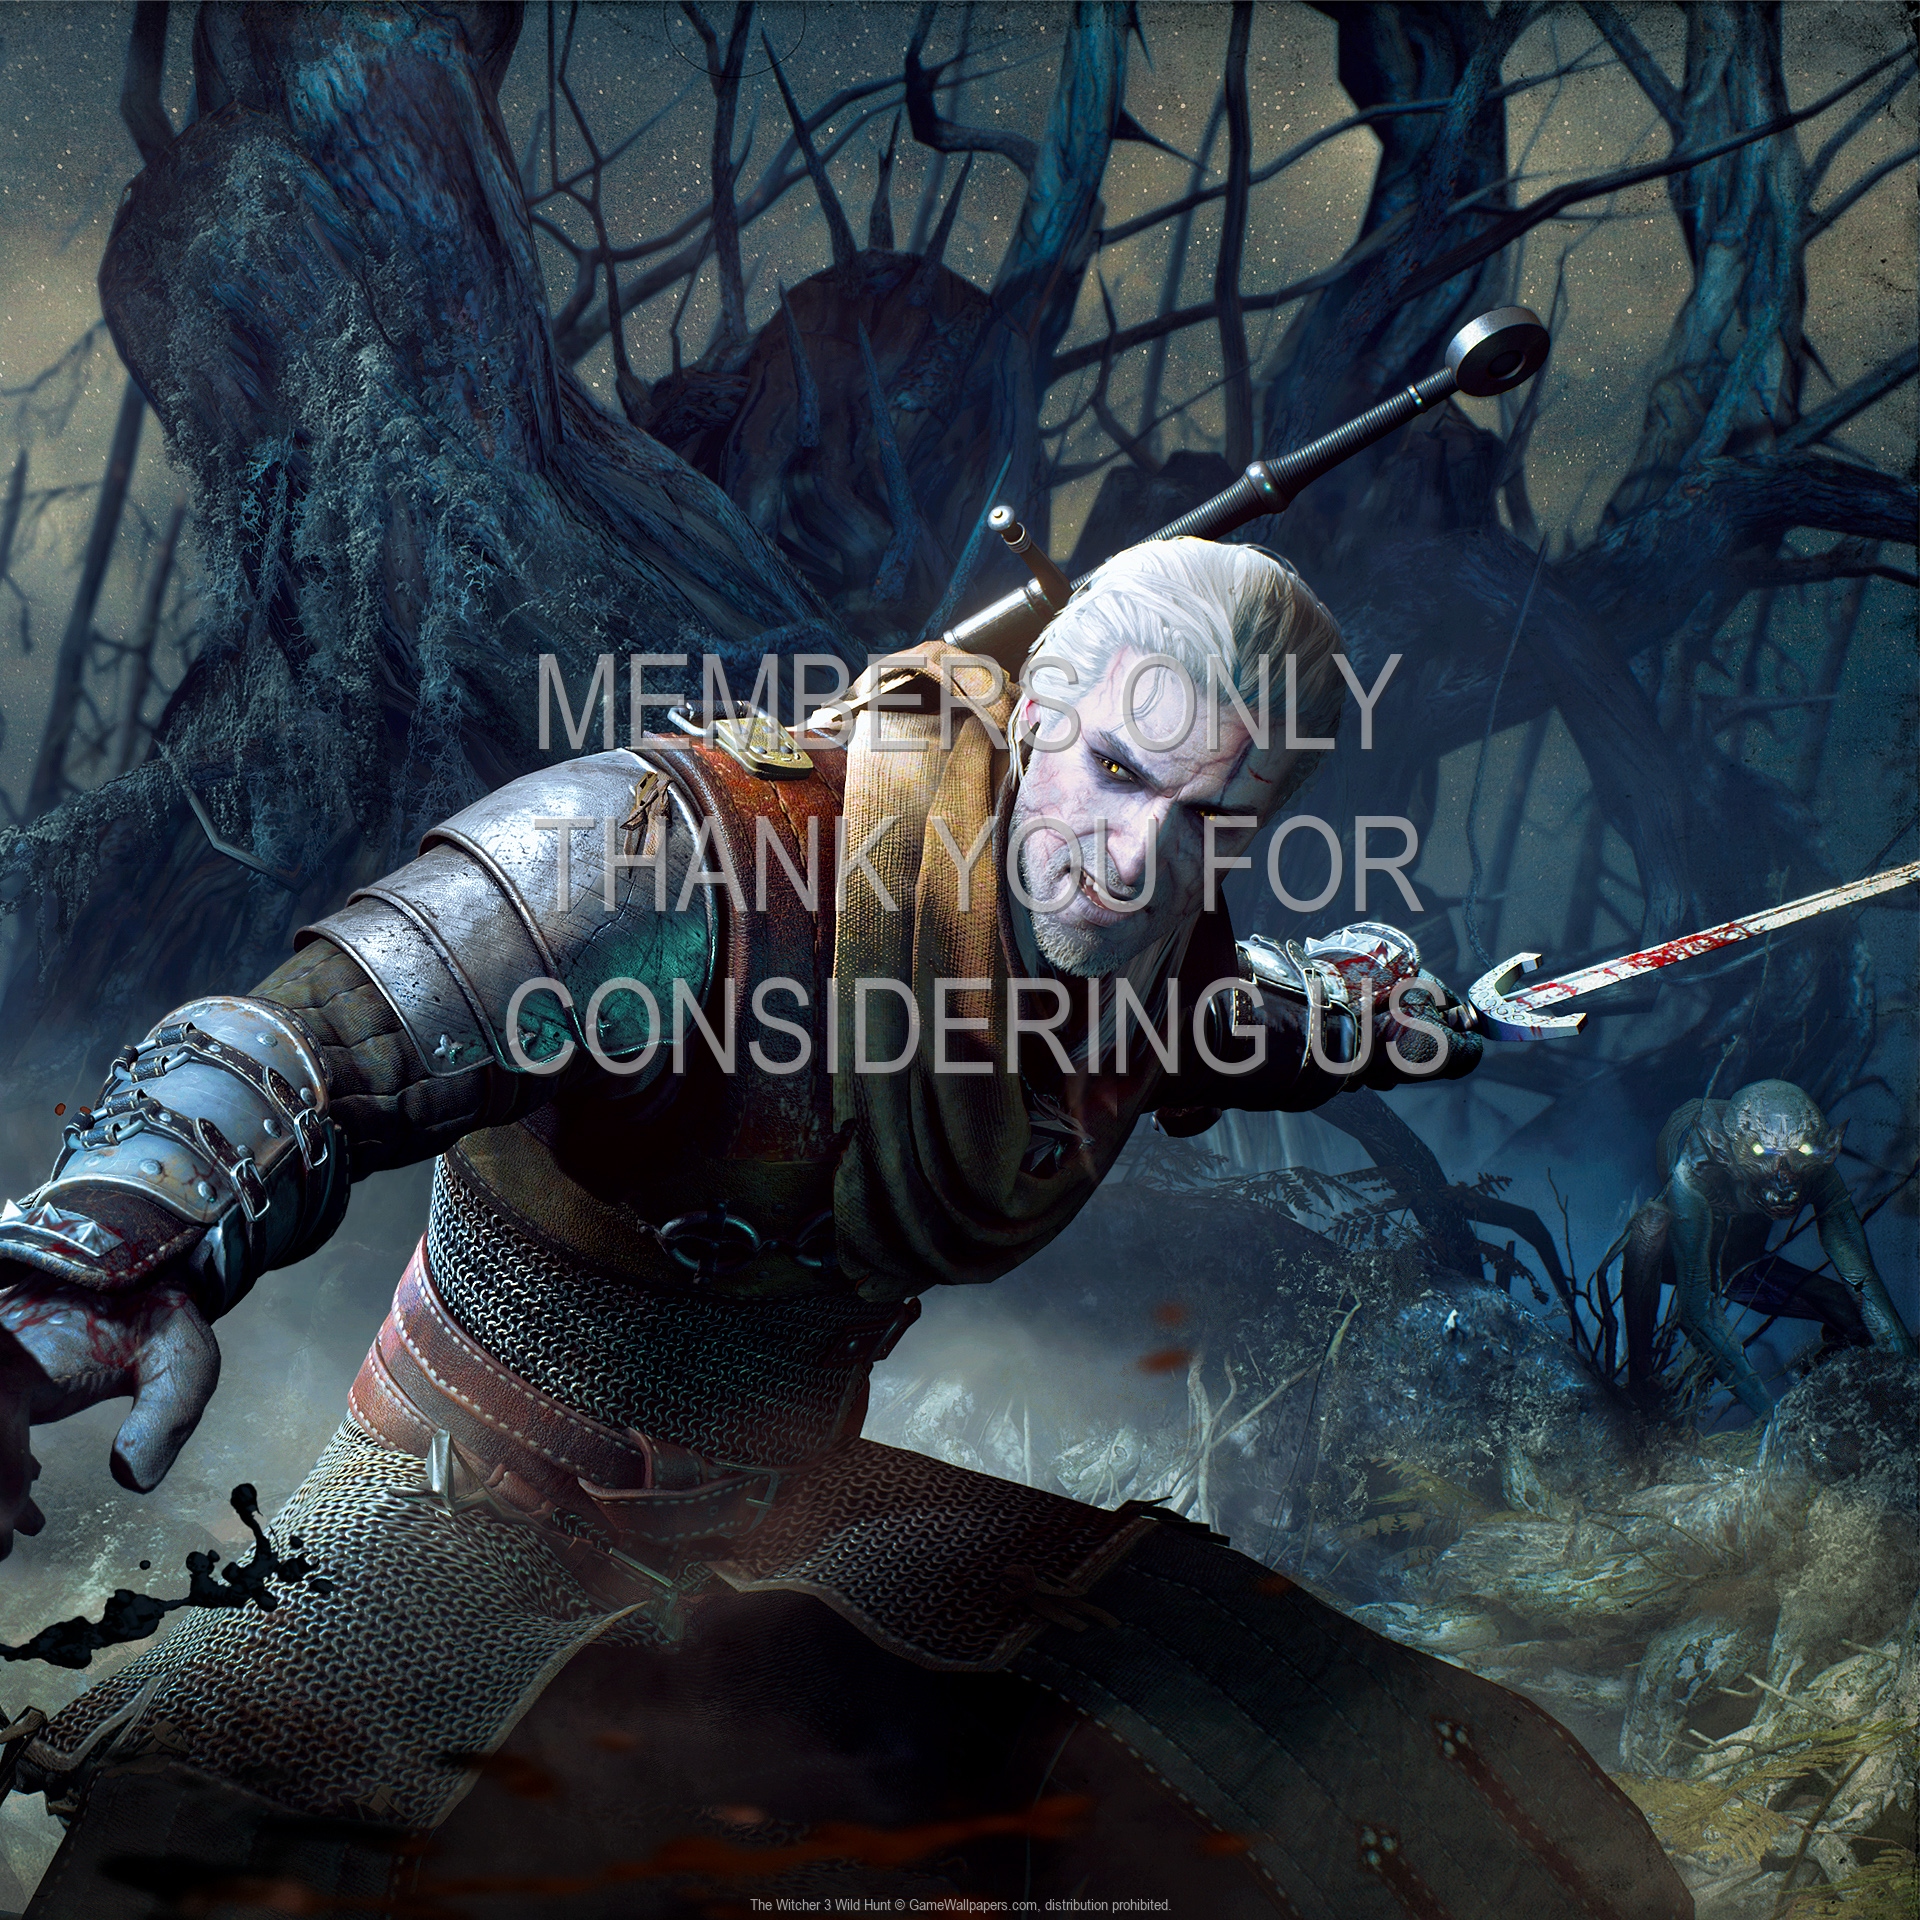 The Witcher 3 Wild Hunt Wallpaper 30 1920x1080 Images, Photos, Reviews